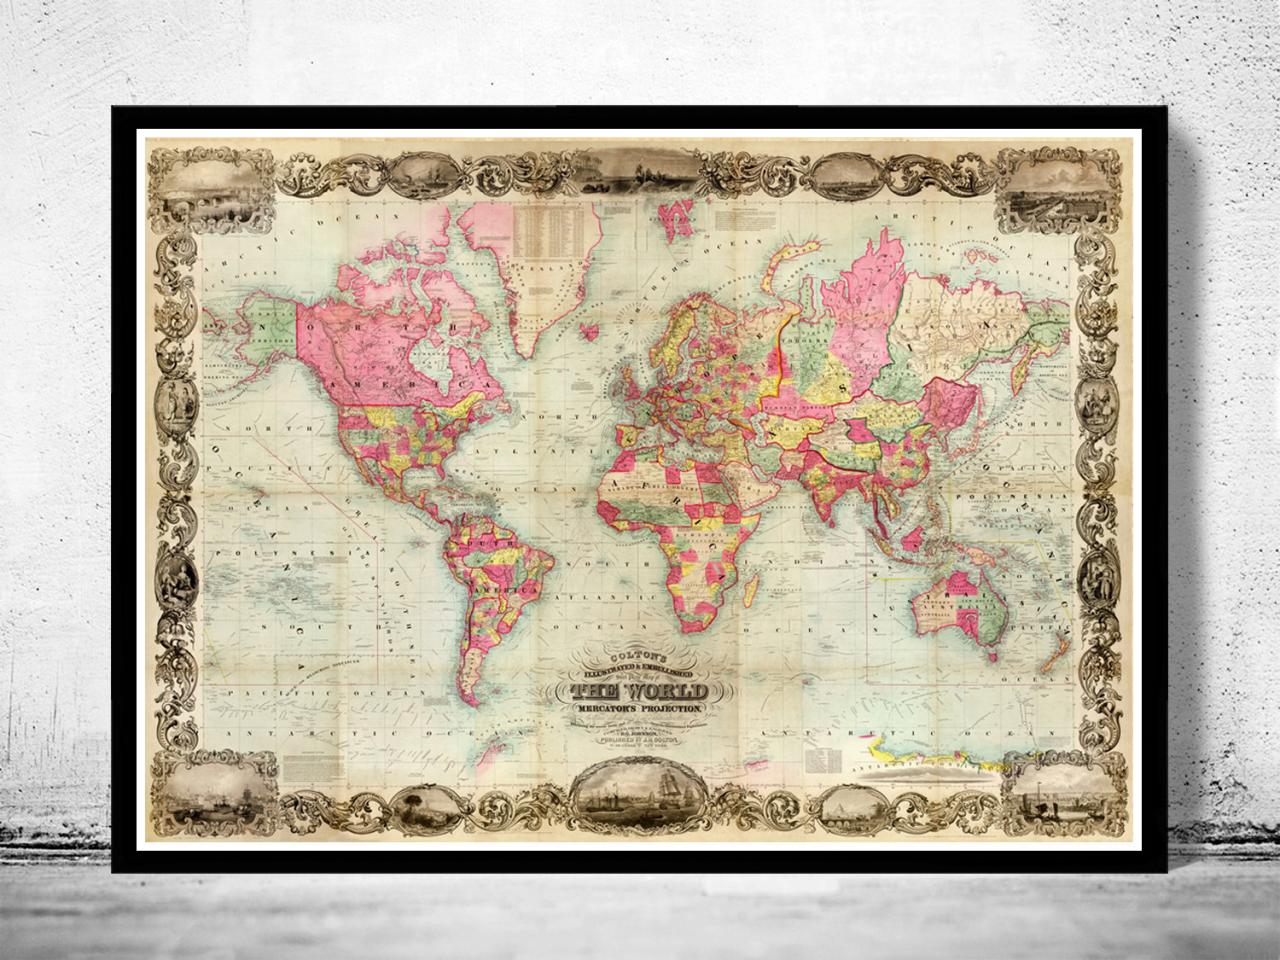 Antique World Map 1854 Mercator Projection